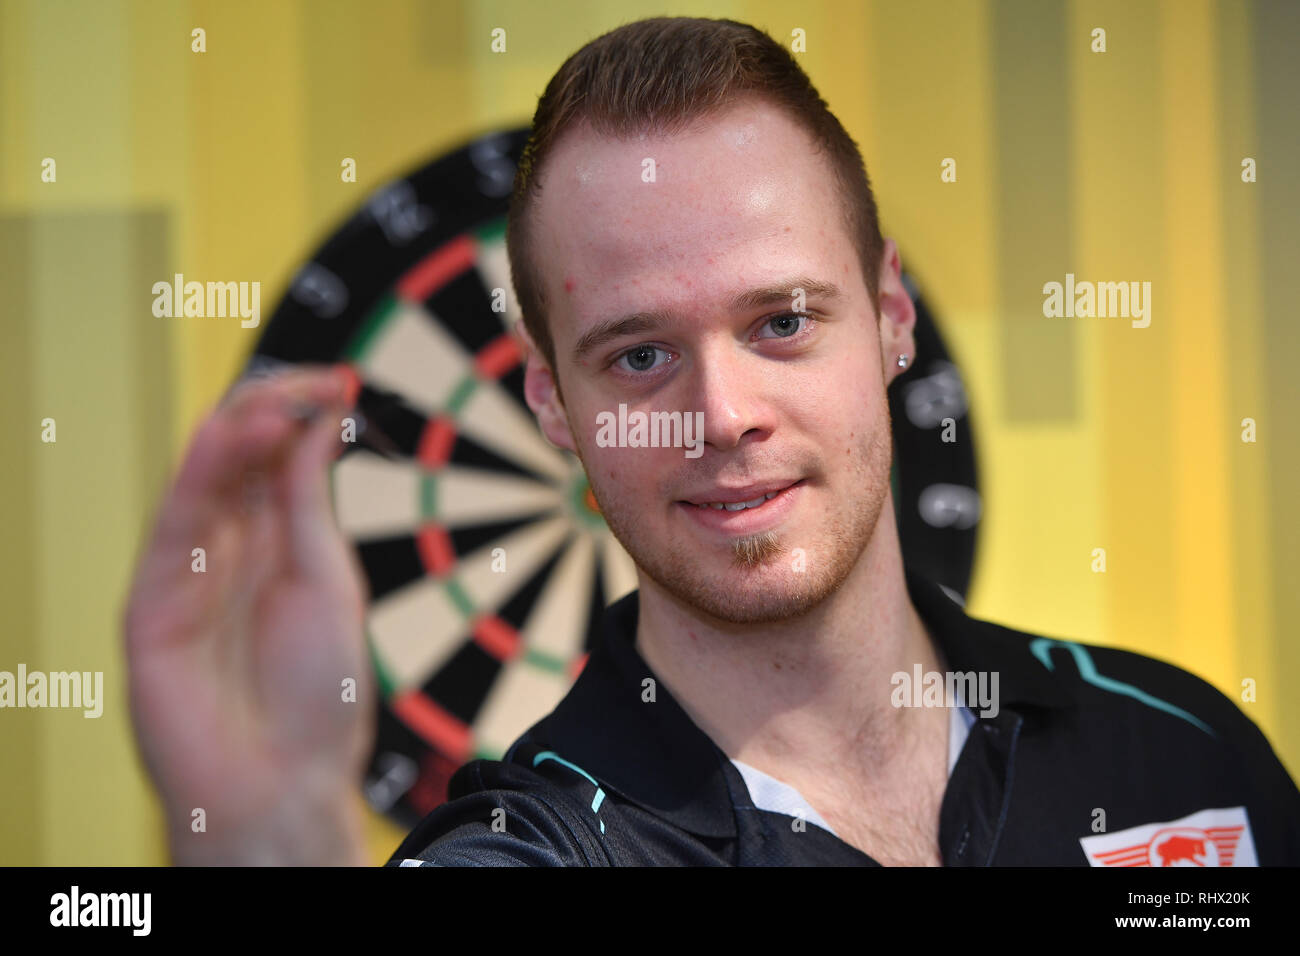 Deutschland. 04th Feb, 2019. Max Hopp is a German dart player. In the public and in the media he is also known as "Maximiser". He is considered the greatest darts talent